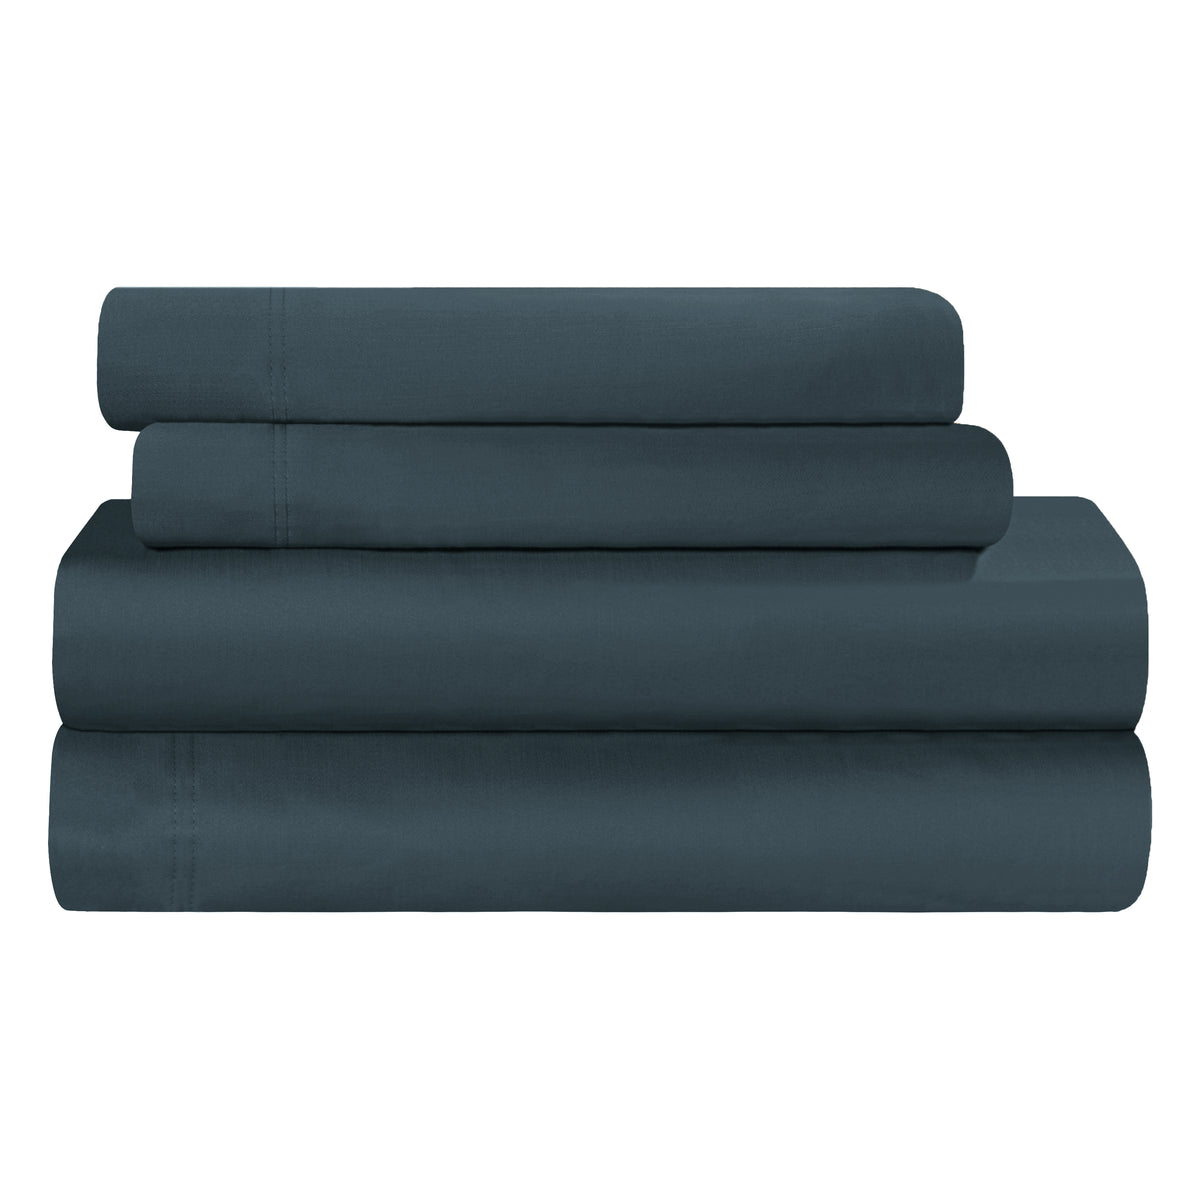 300 Thread Count Rayon From Bamboo Solid Deep Pocket Sheet Set - Charcoal